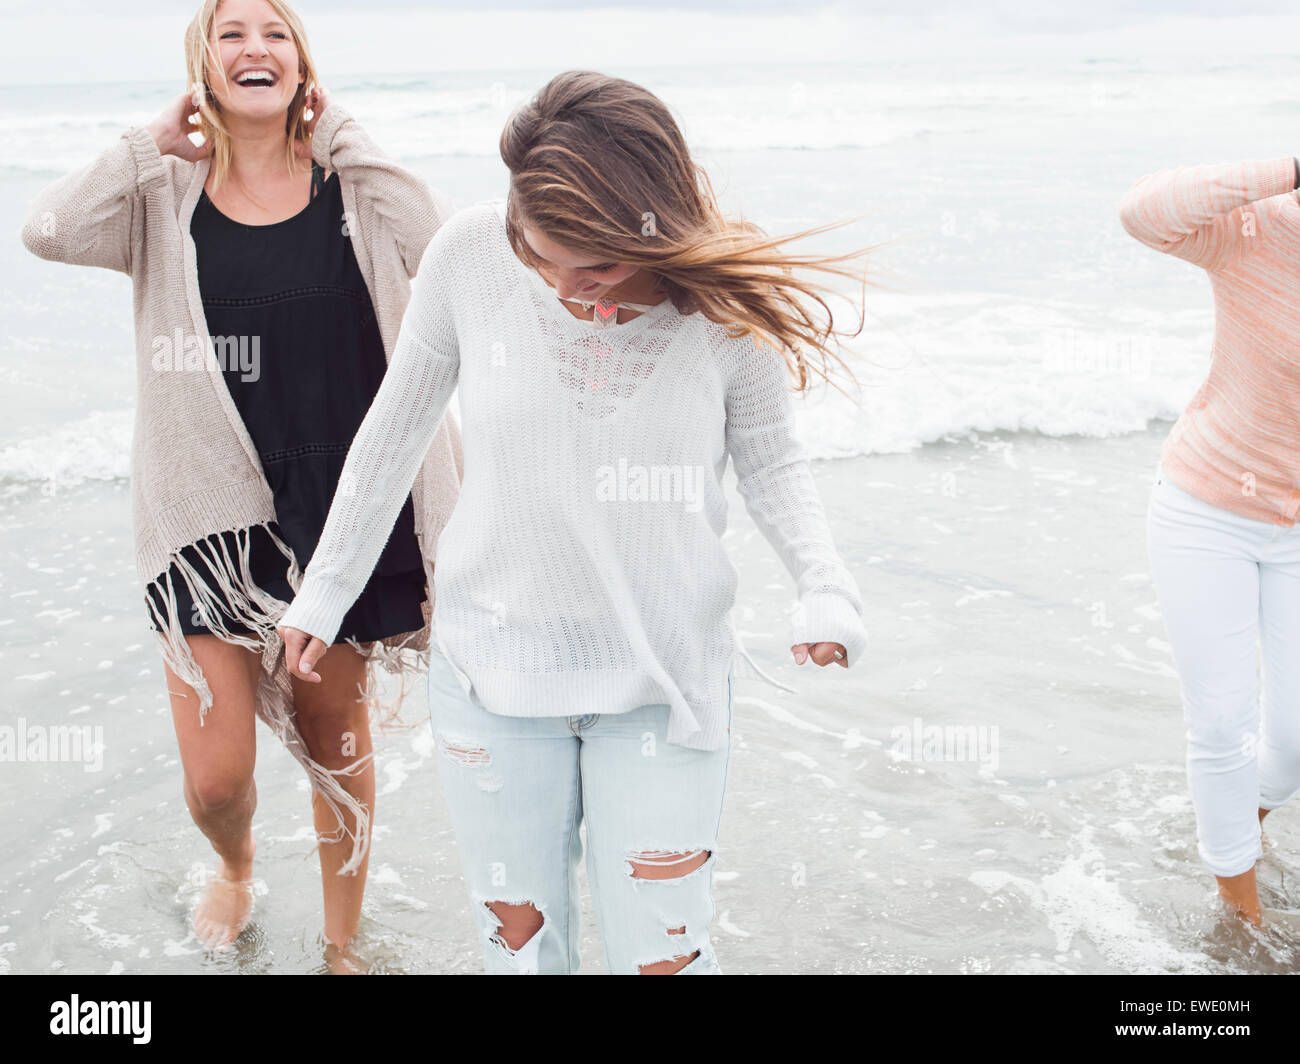 Three smiling young women walking on a beach Stock Photo